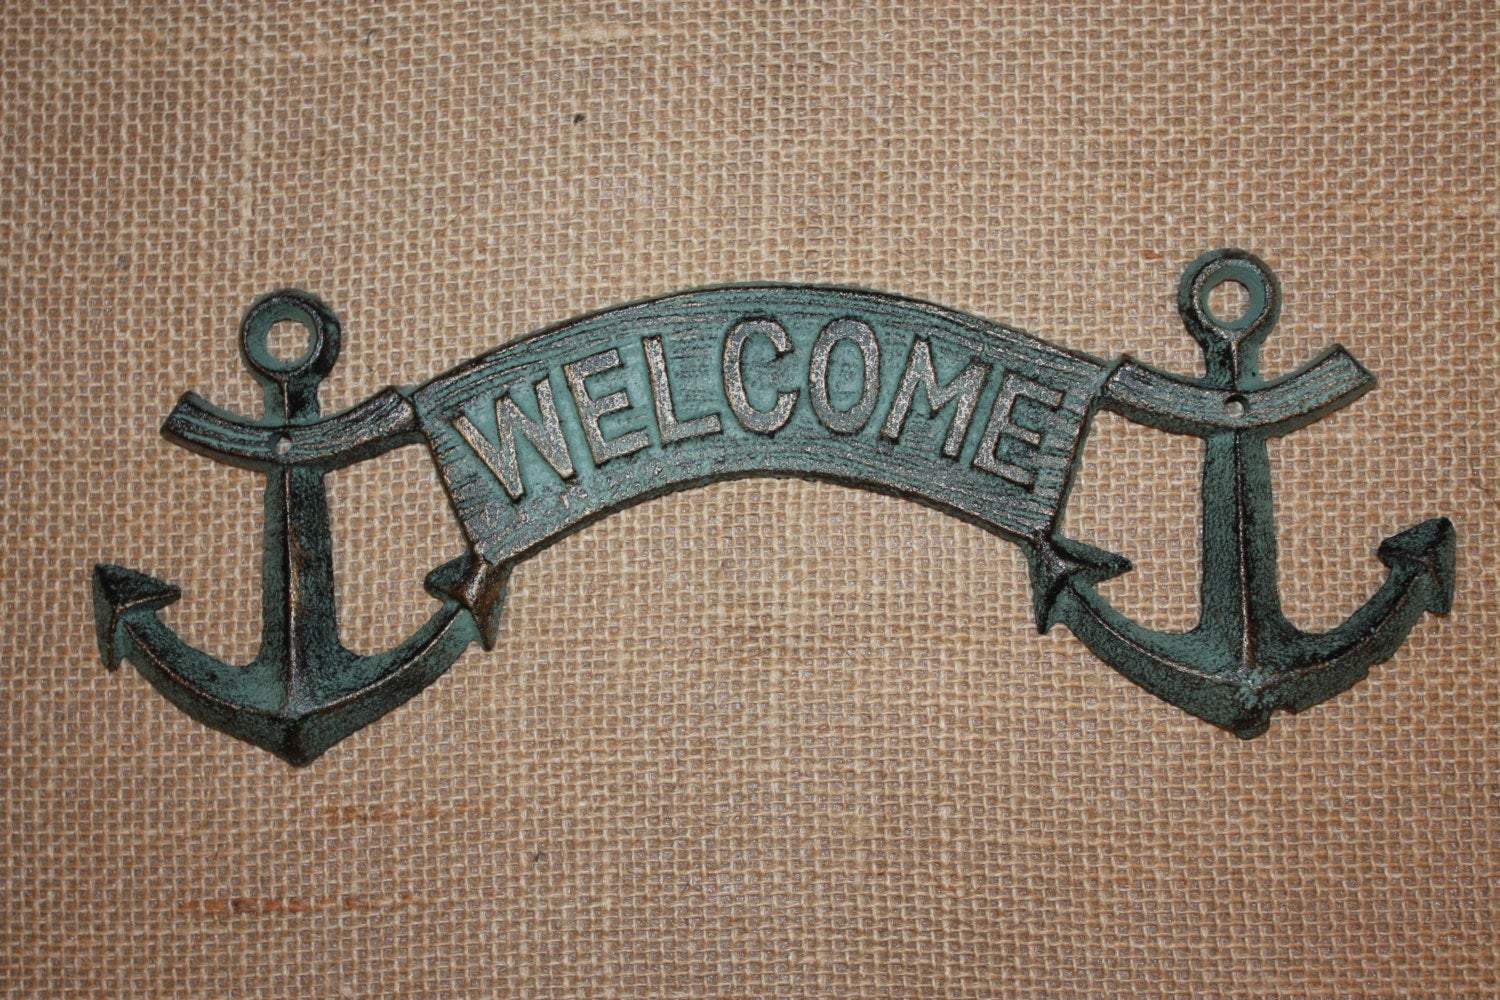 8 pcs) Anchor wall decor, bronze look nautical decor, Nautical welcome sign,free shipping, ready to paint, nautical anchor wall decor, BL-43